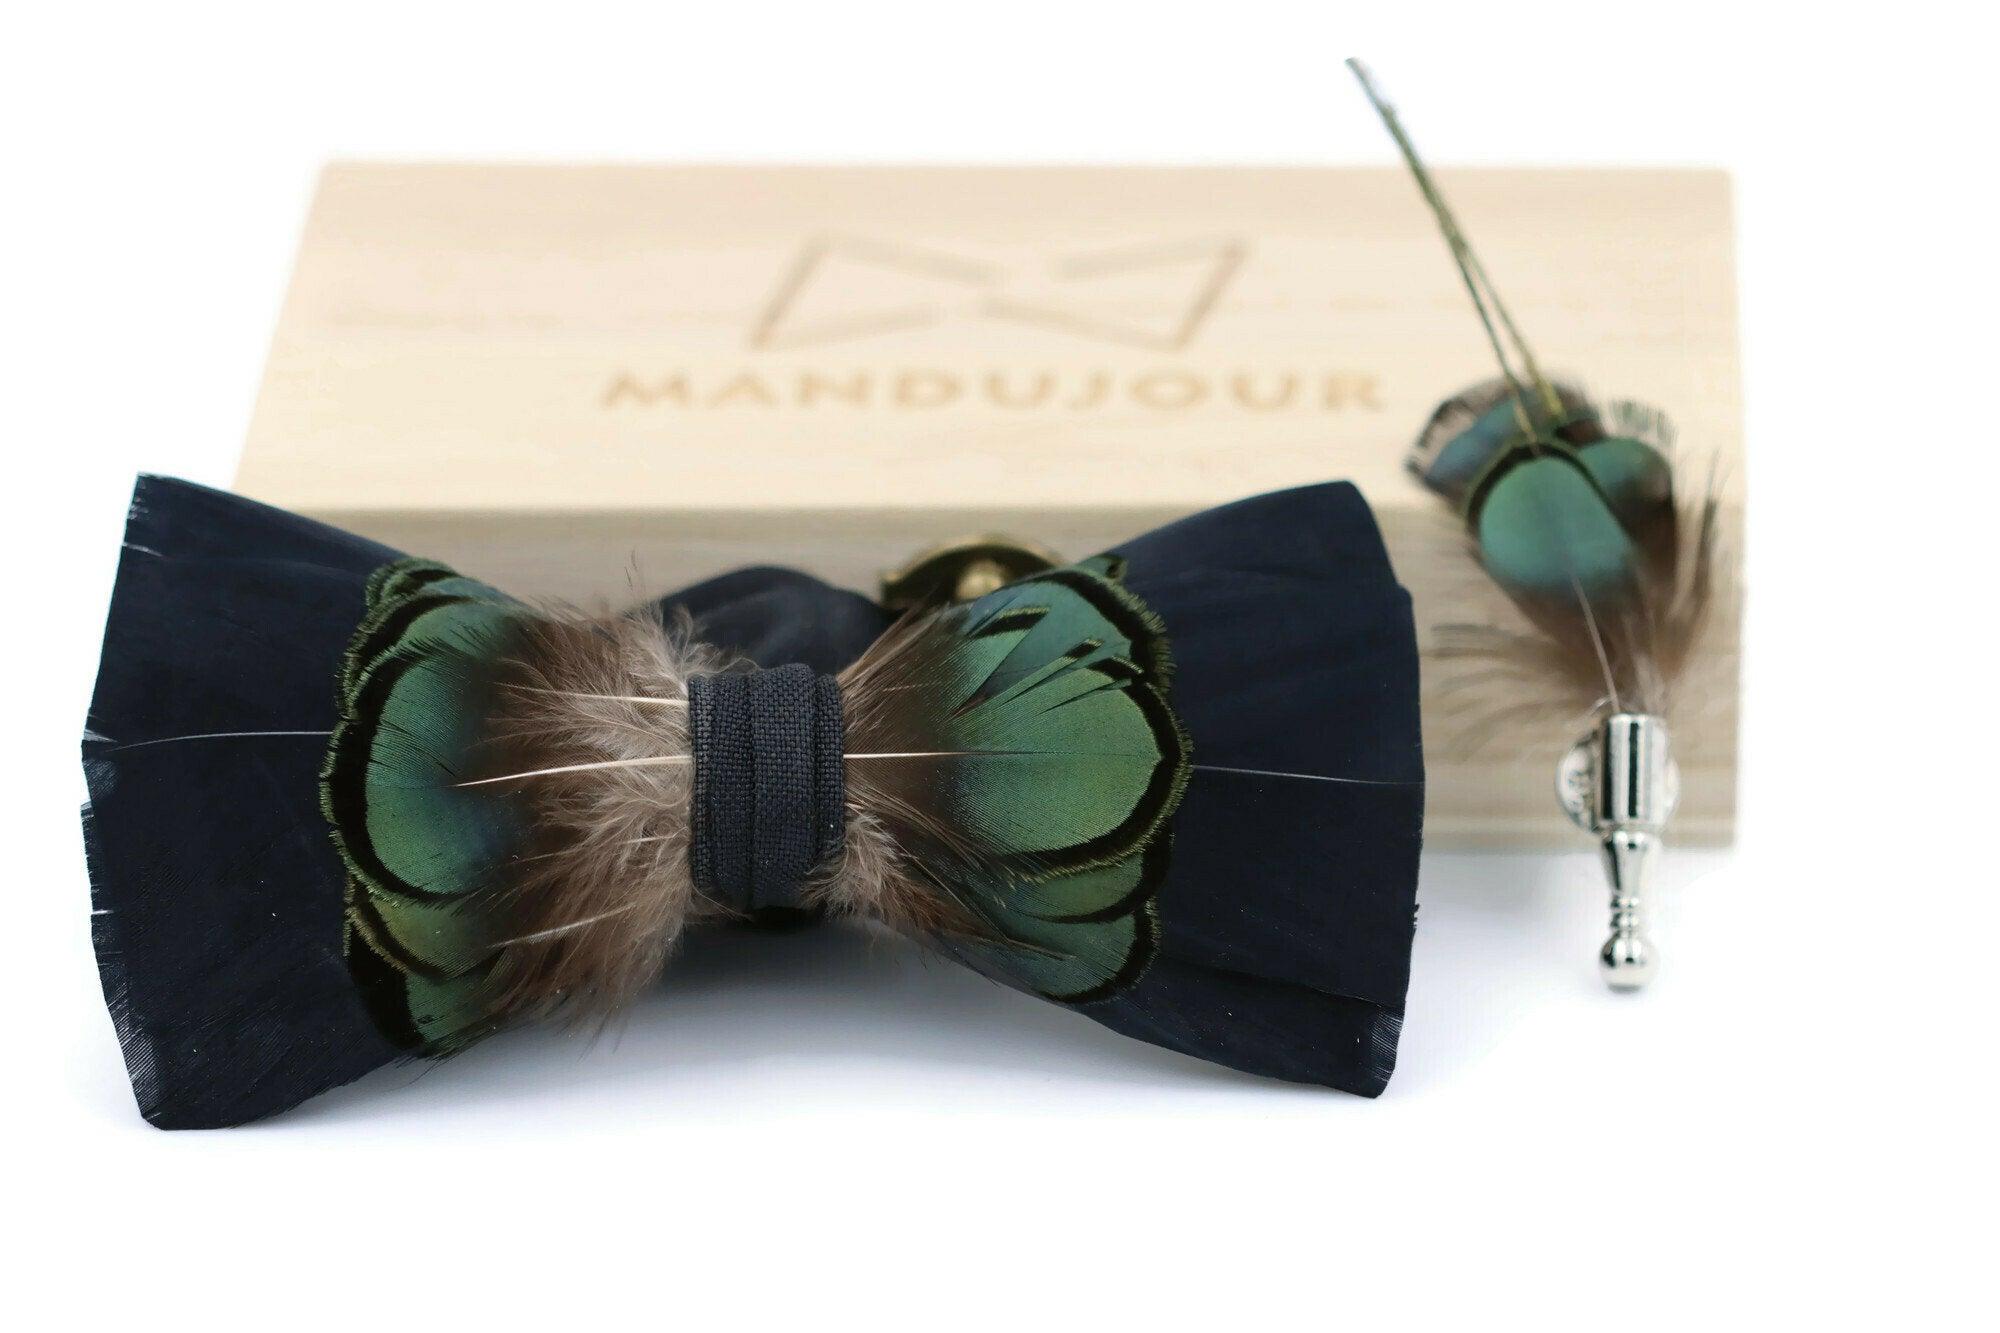 Pheasant Feather Bow Tie - Handcrafted, Sustainable